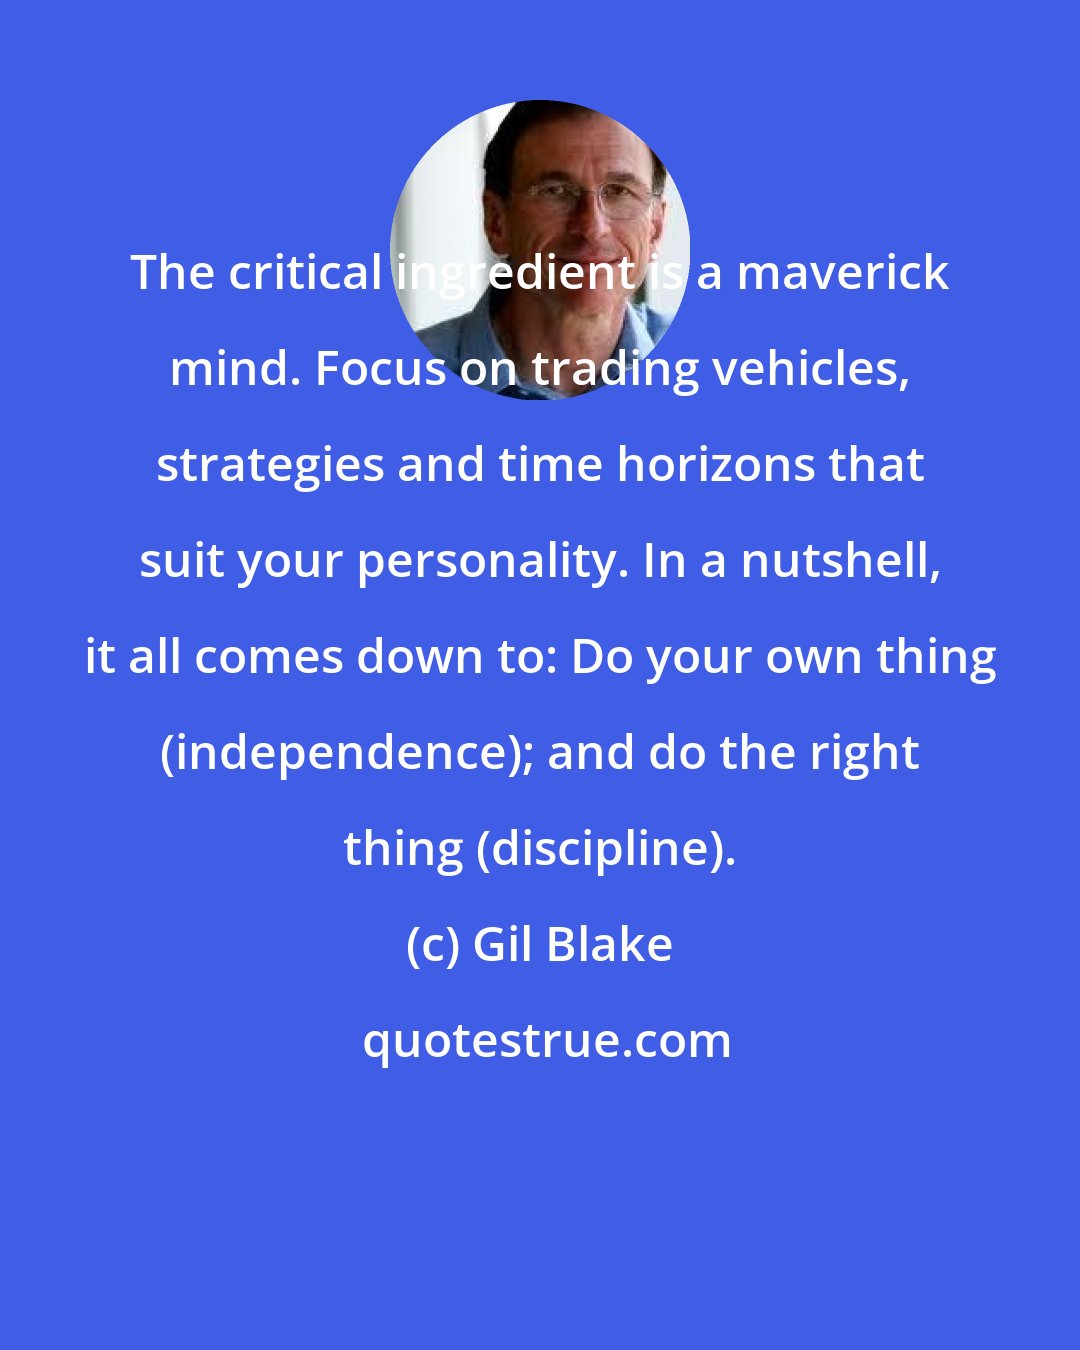 Gil Blake: The critical ingredient is a maverick mind. Focus on trading vehicles, strategies and time horizons that suit your personality. In a nutshell, it all comes down to: Do your own thing (independence); and do the right thing (discipline).